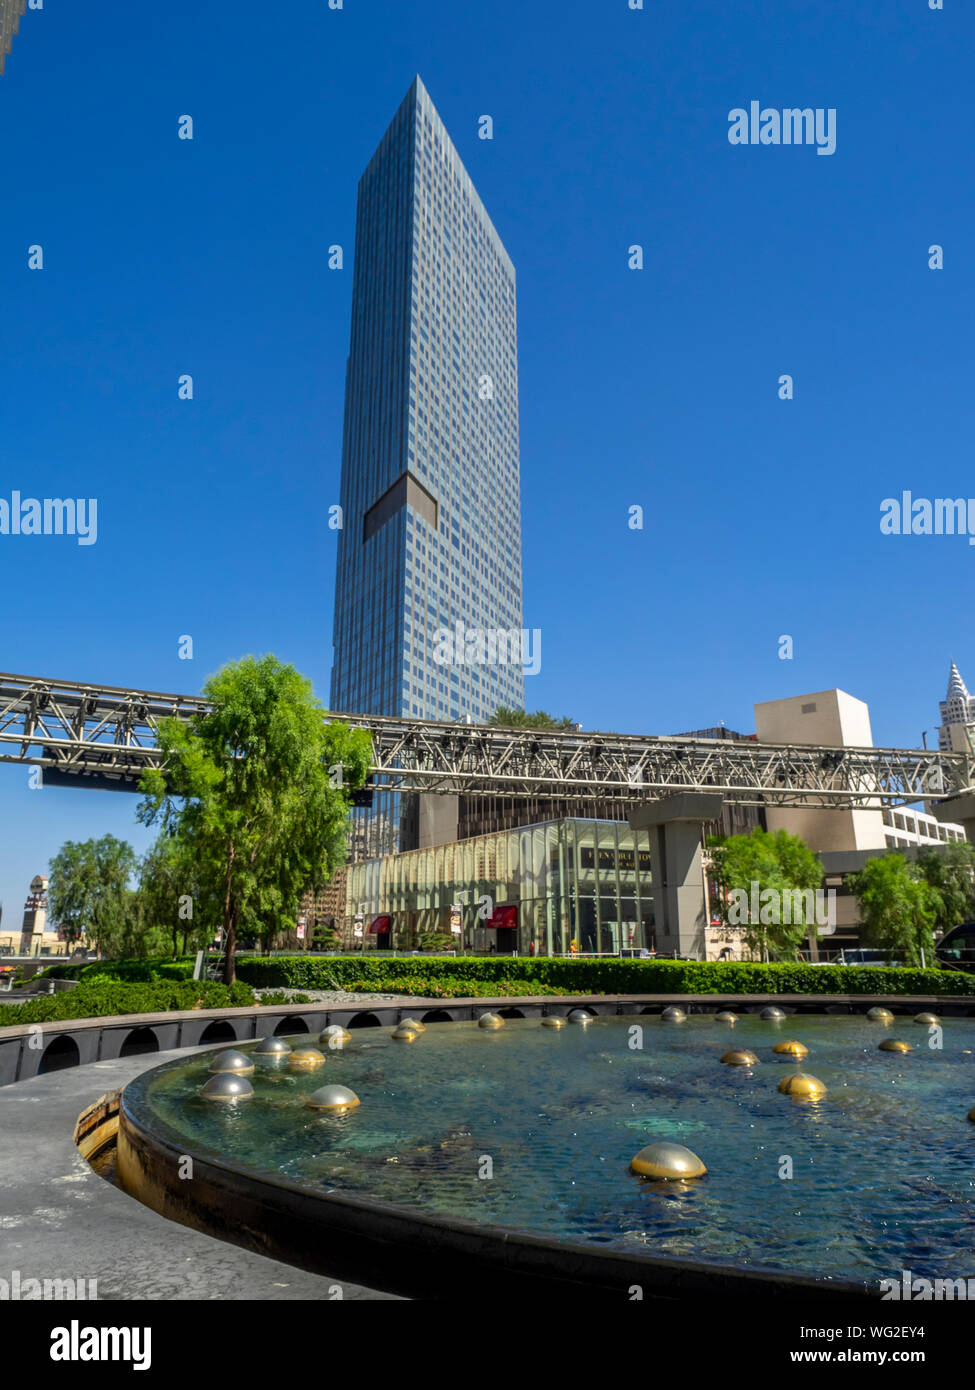 Aria Star High Resolution Stock Photography and Images - Alamy